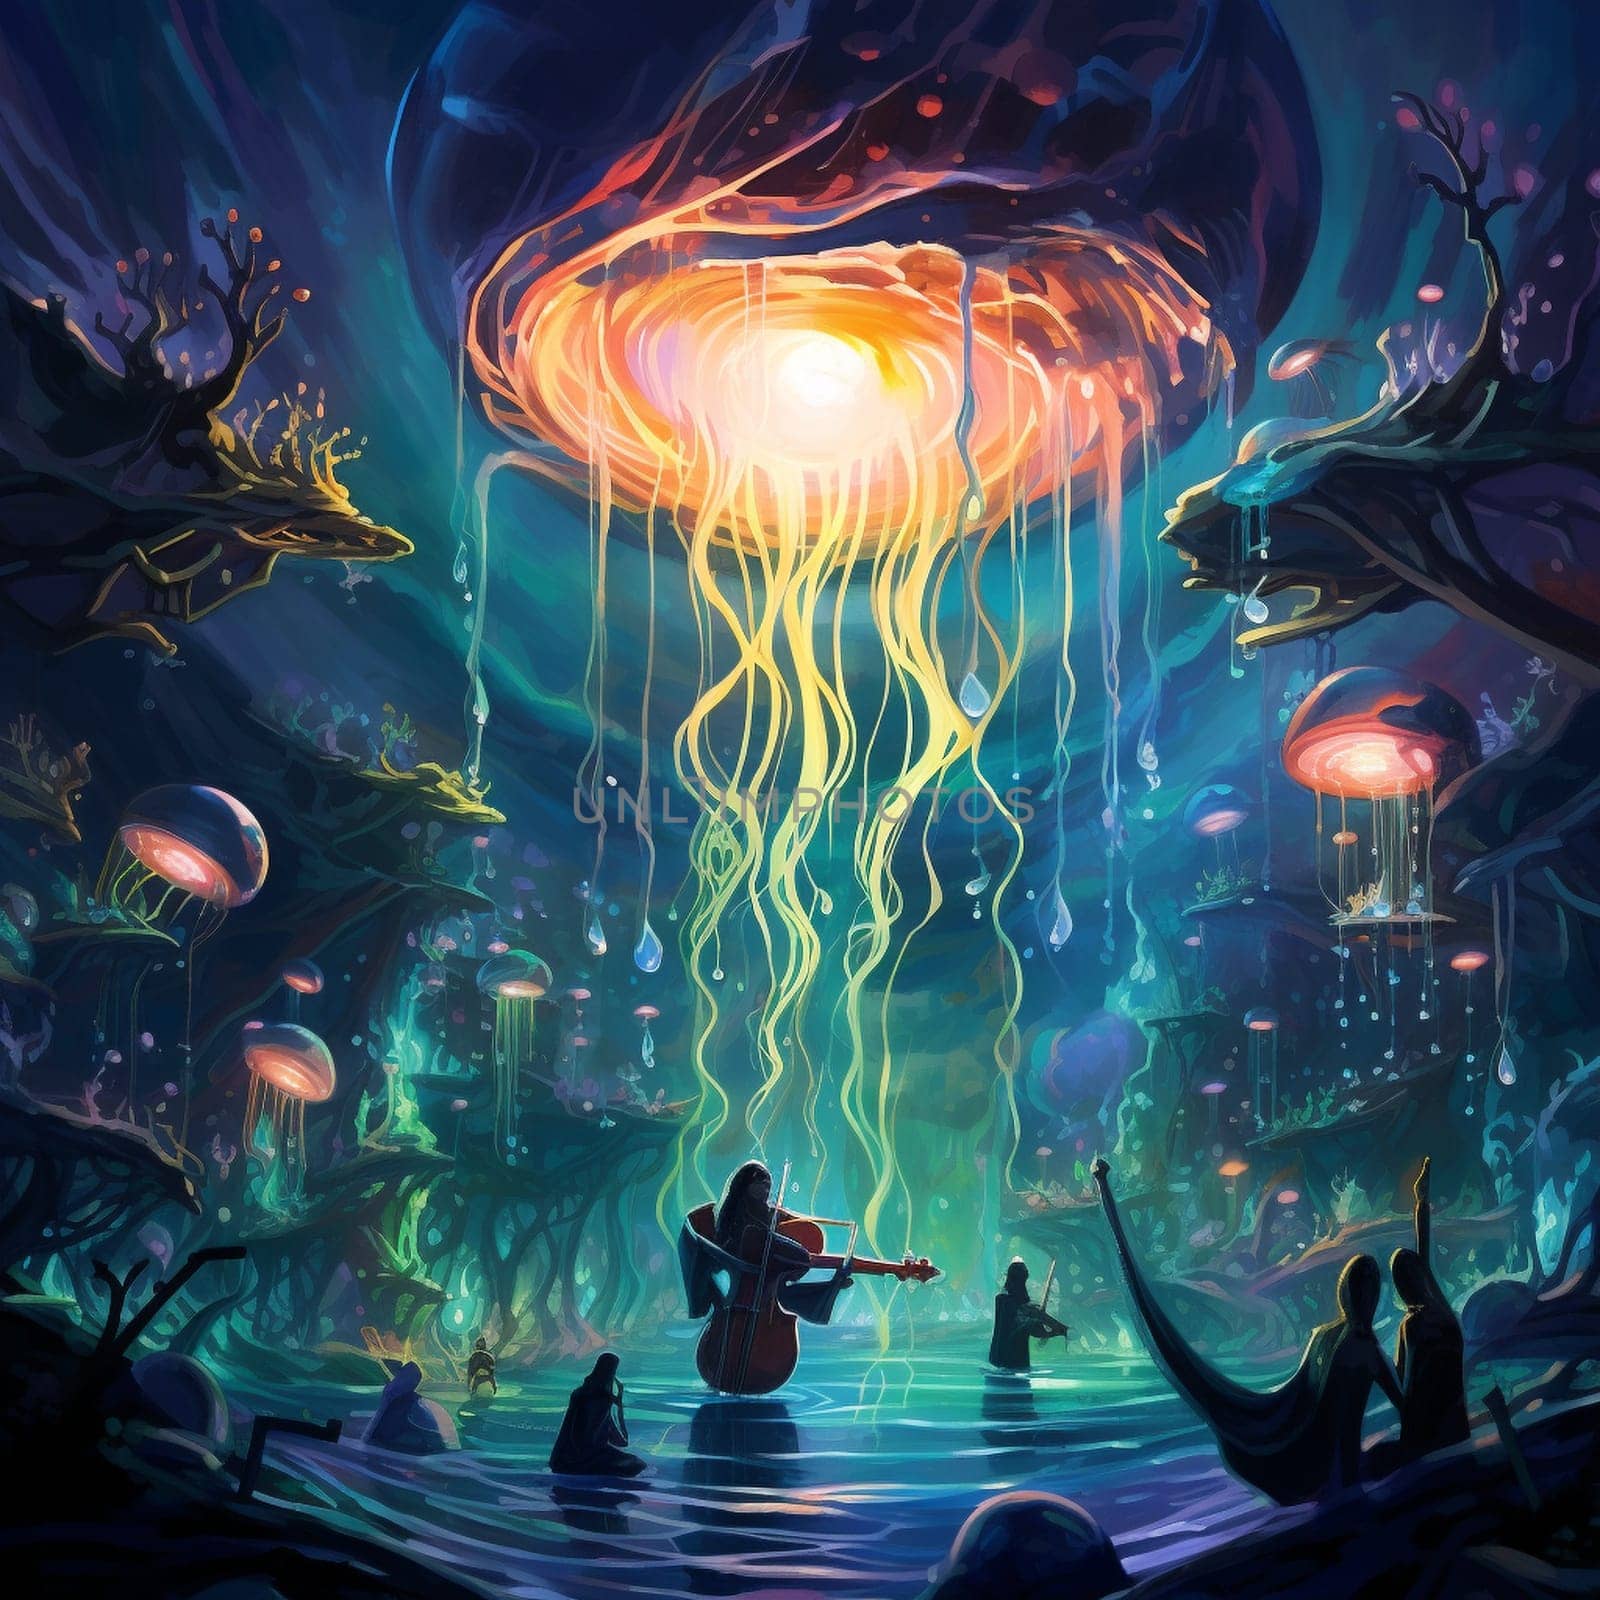 The Abyssal Symphony: Deep-sea creatures playing harmonious tunes in the dark depths by Sahin